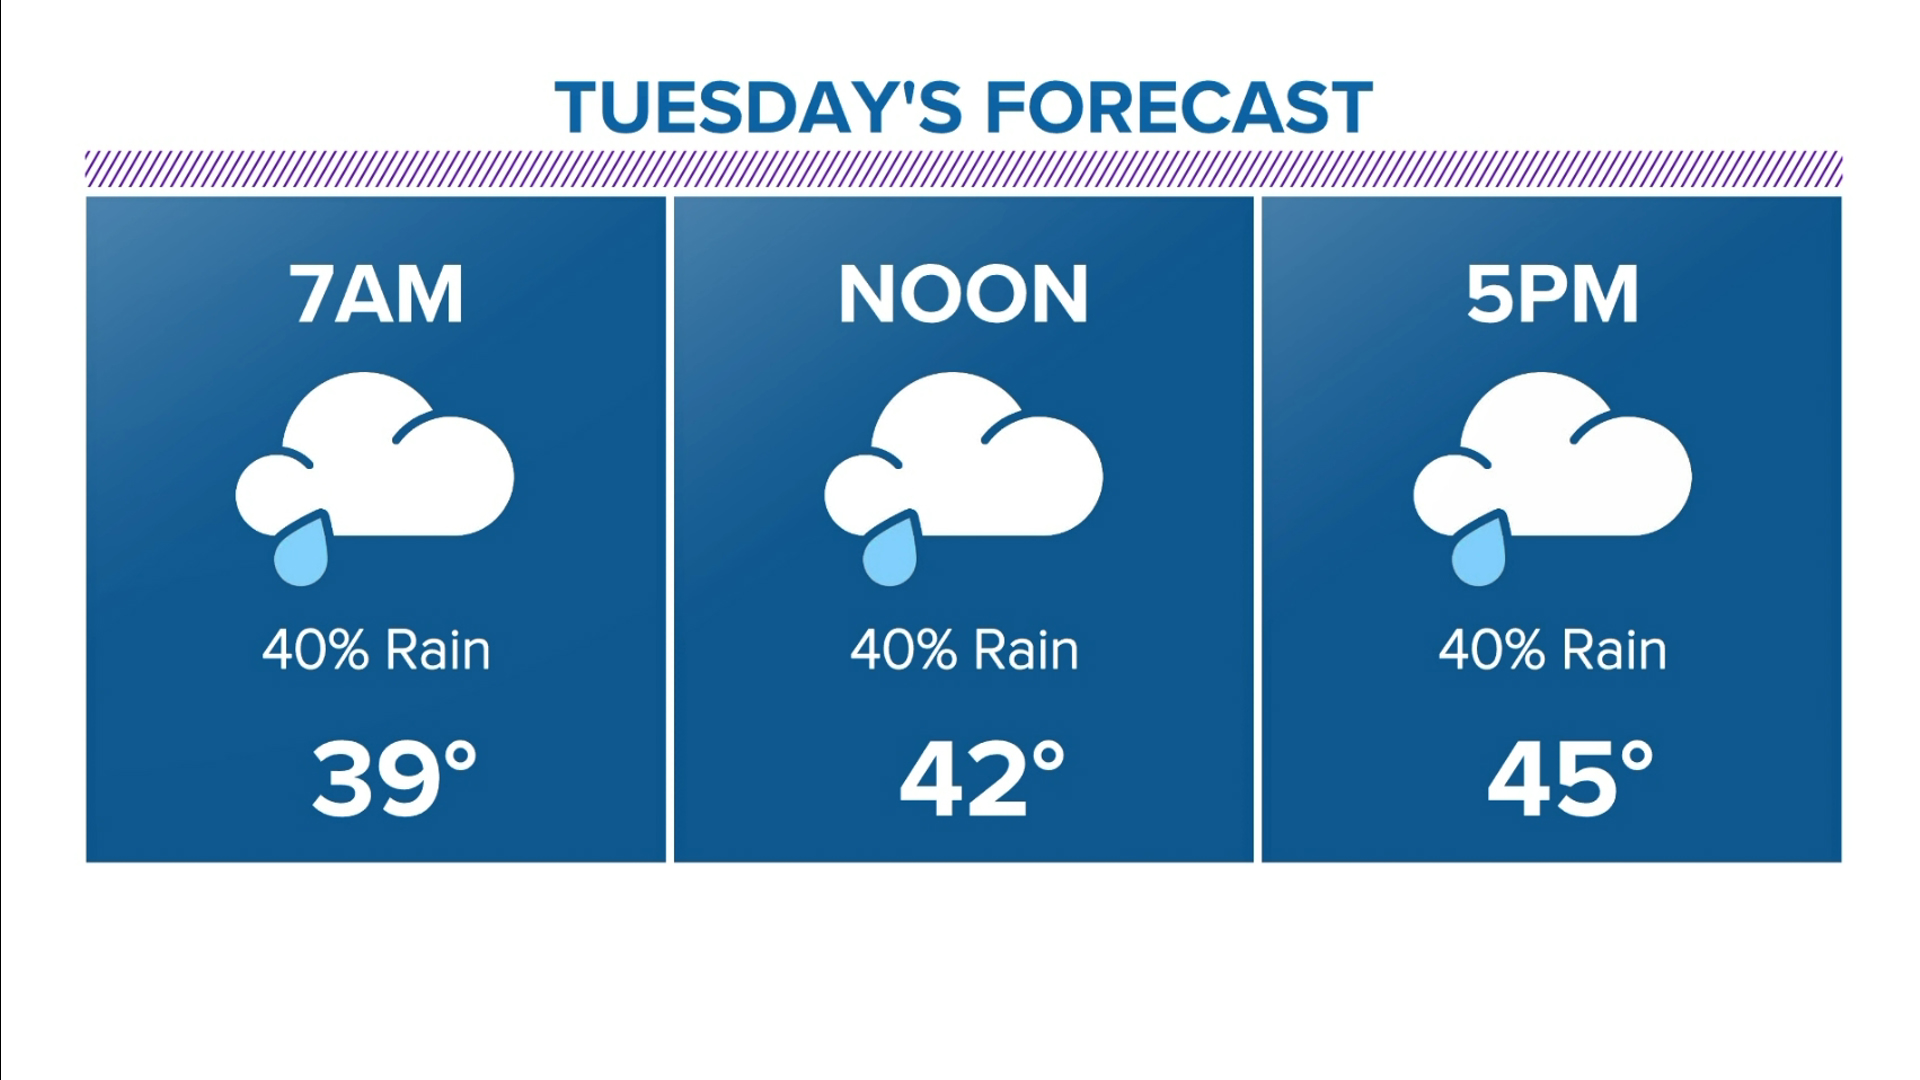 There is a 40% chance of light rain and drizzles Tuesday with temperatures only reaching the 40s. We will stay rainy and cold up until Friday.